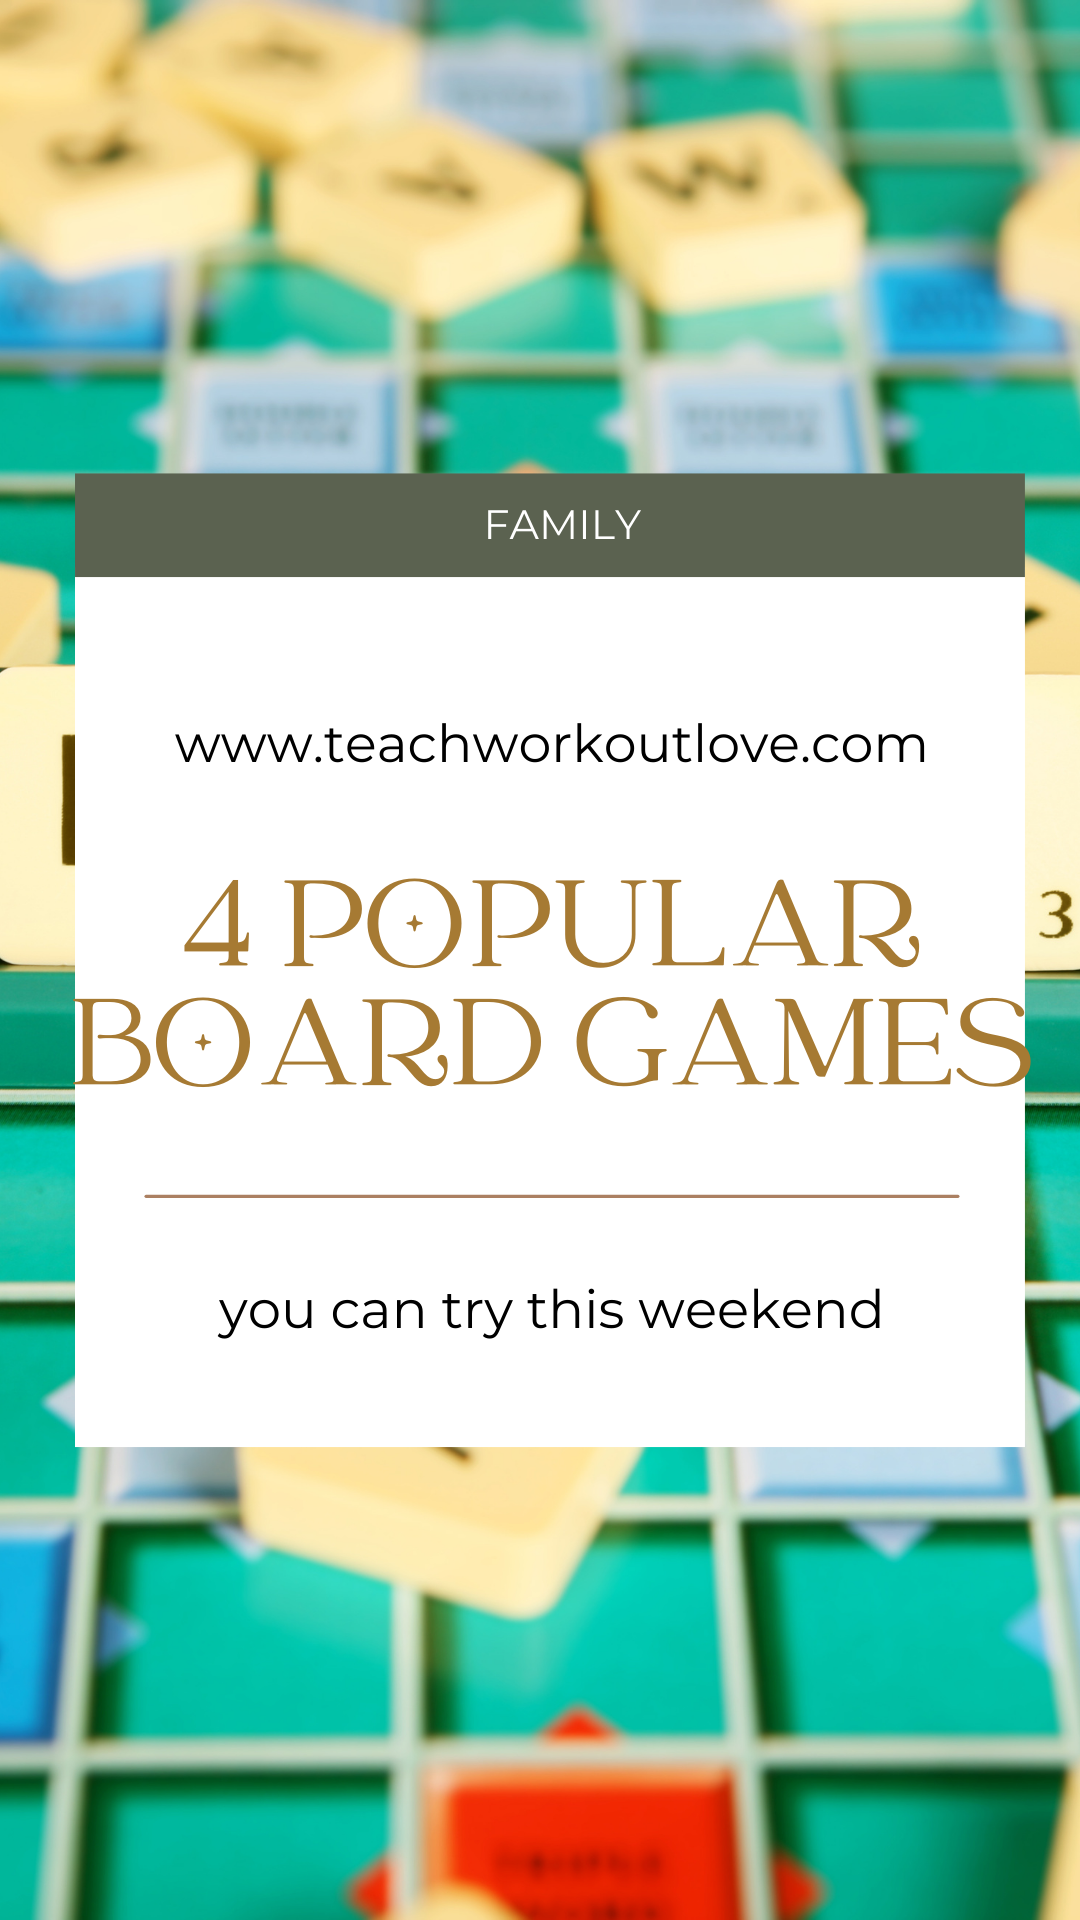 I'll tell you about some popular board games you can play this weekend. Let us see how many of these you have played and how many you'll be trying.